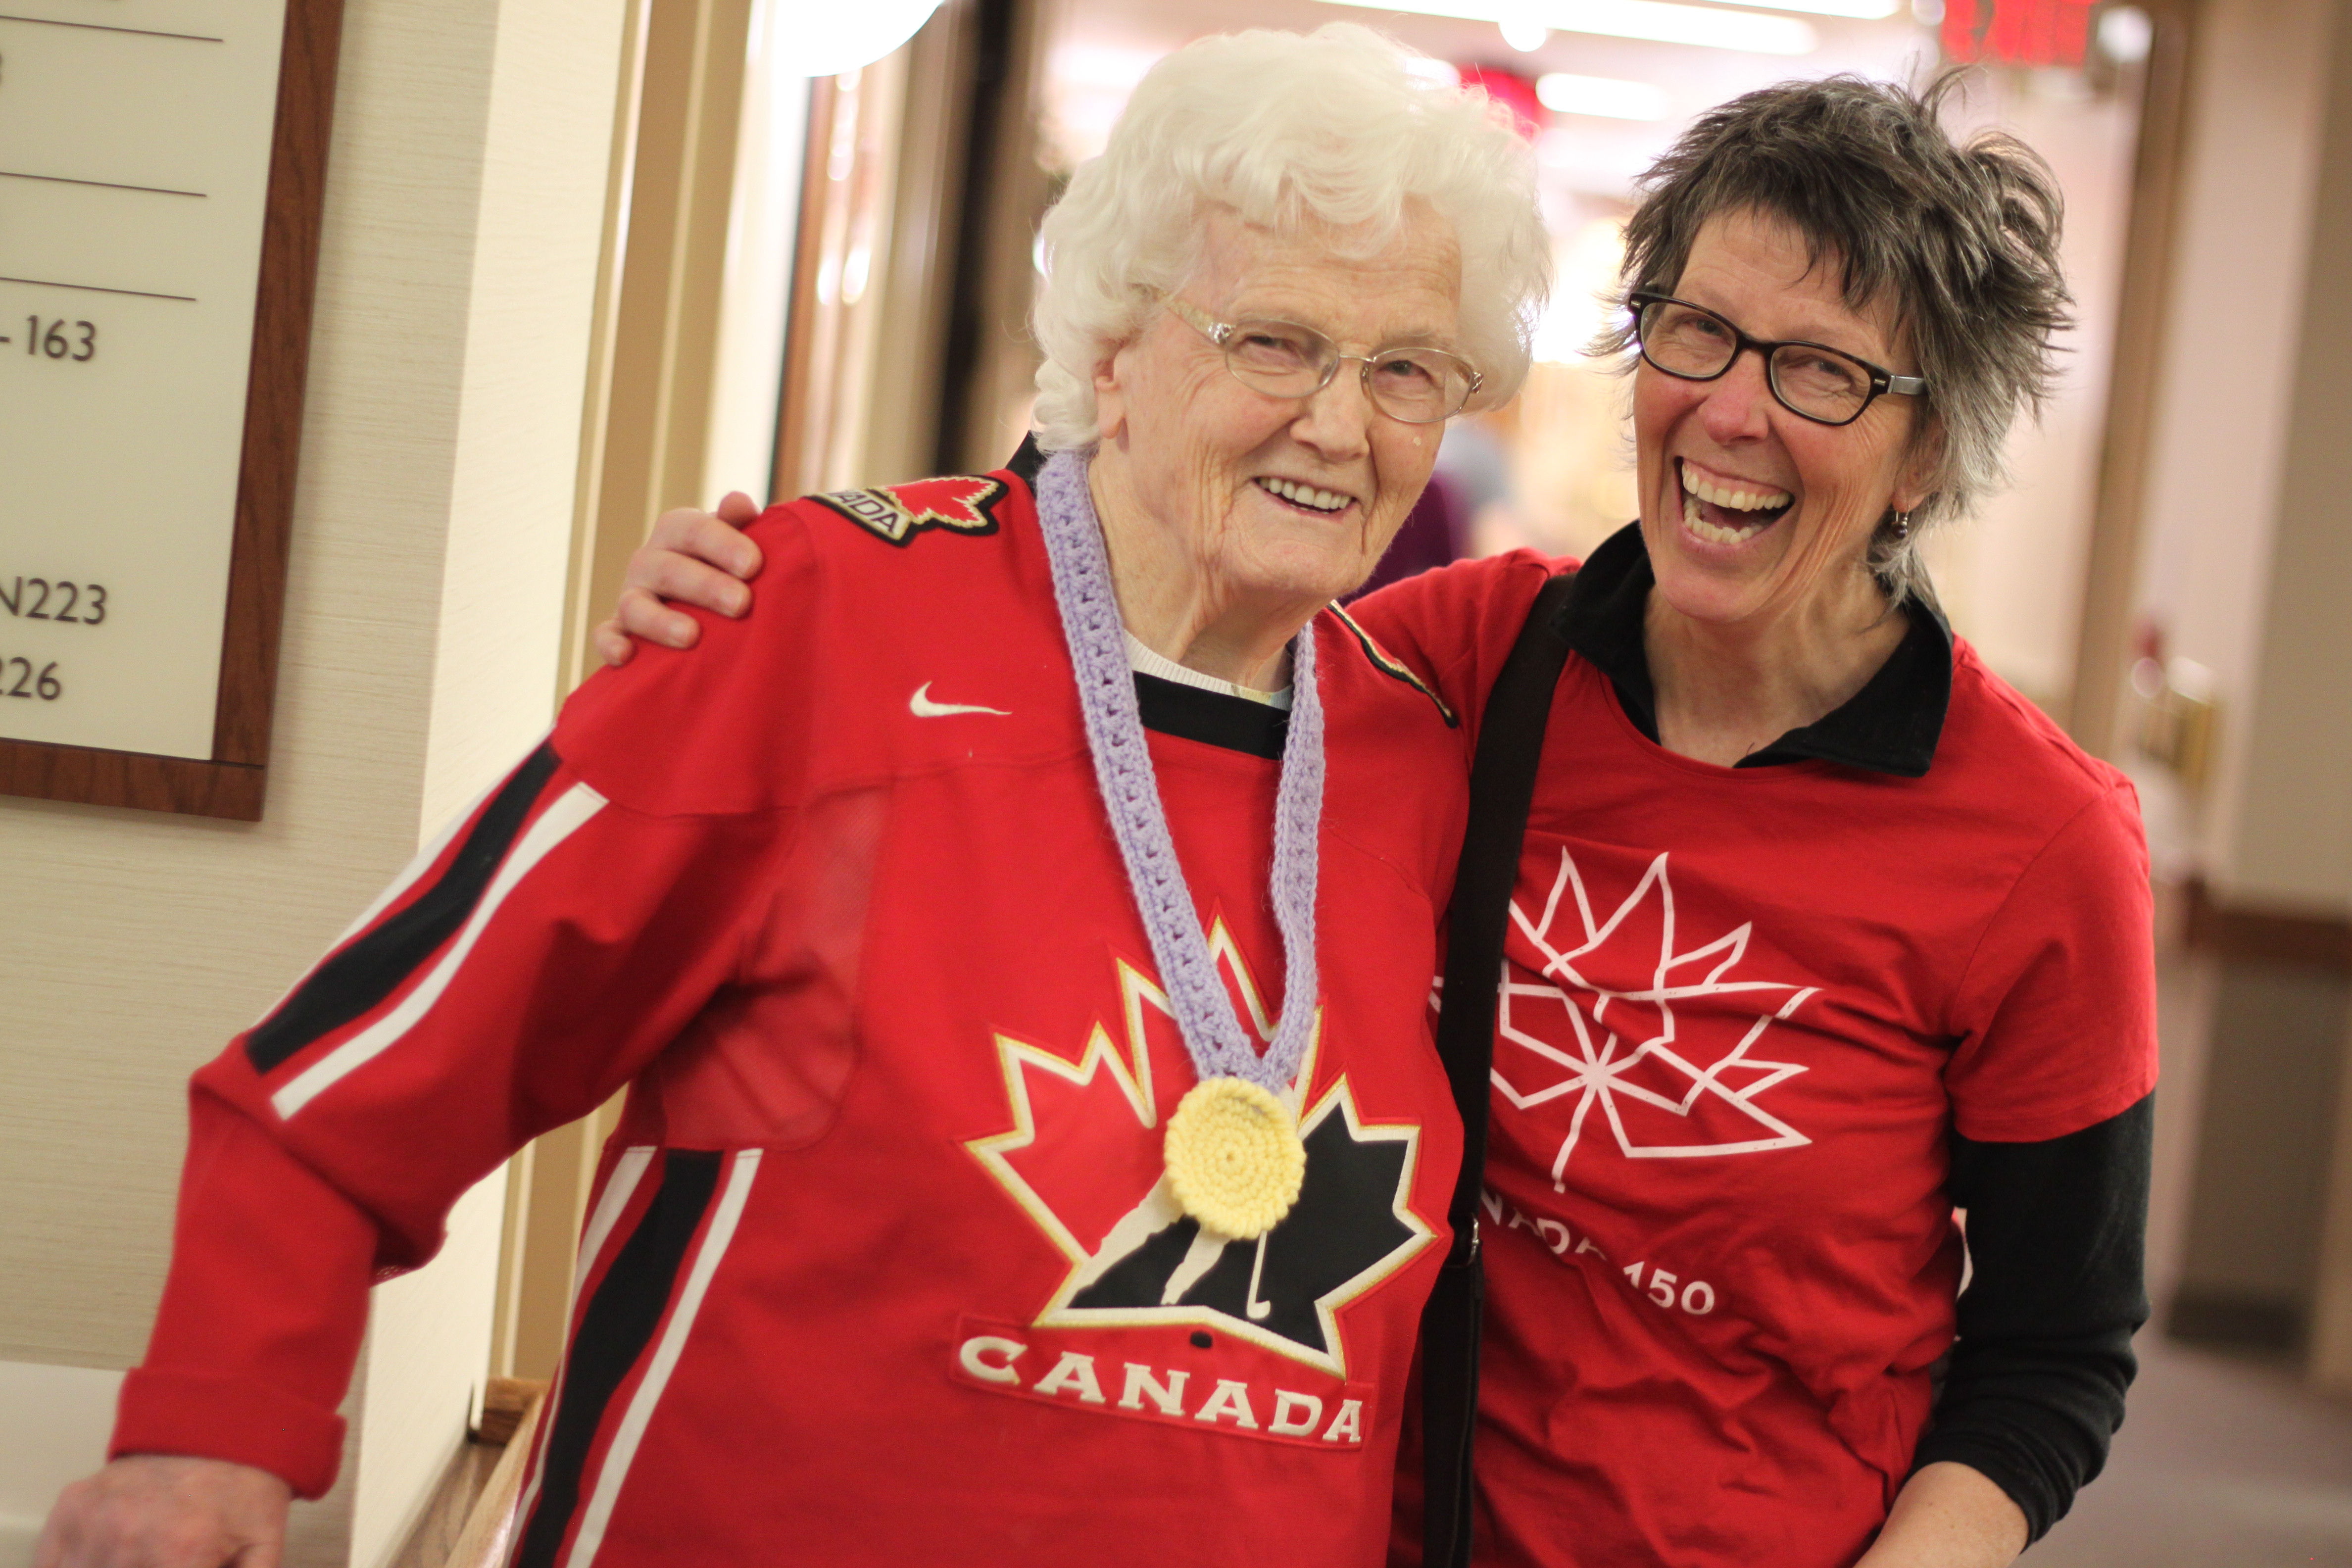 resident along with daughter smile while wearing their Canada Olympic shirts